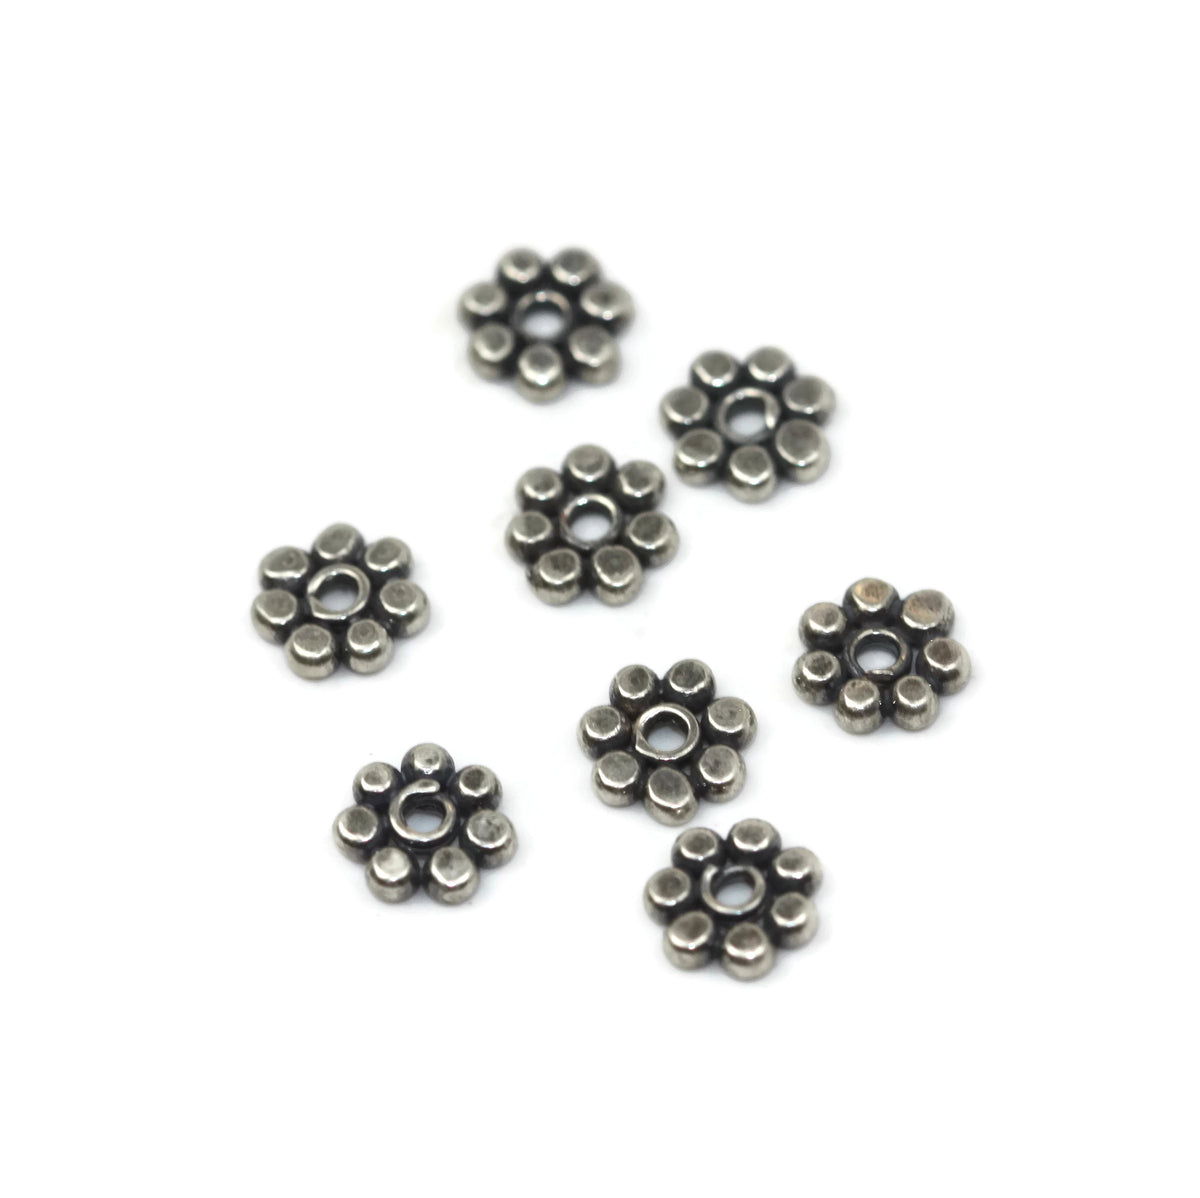 Bali Bead Sterling Silver Daisy Spacer Bead 1 x 5.5mm